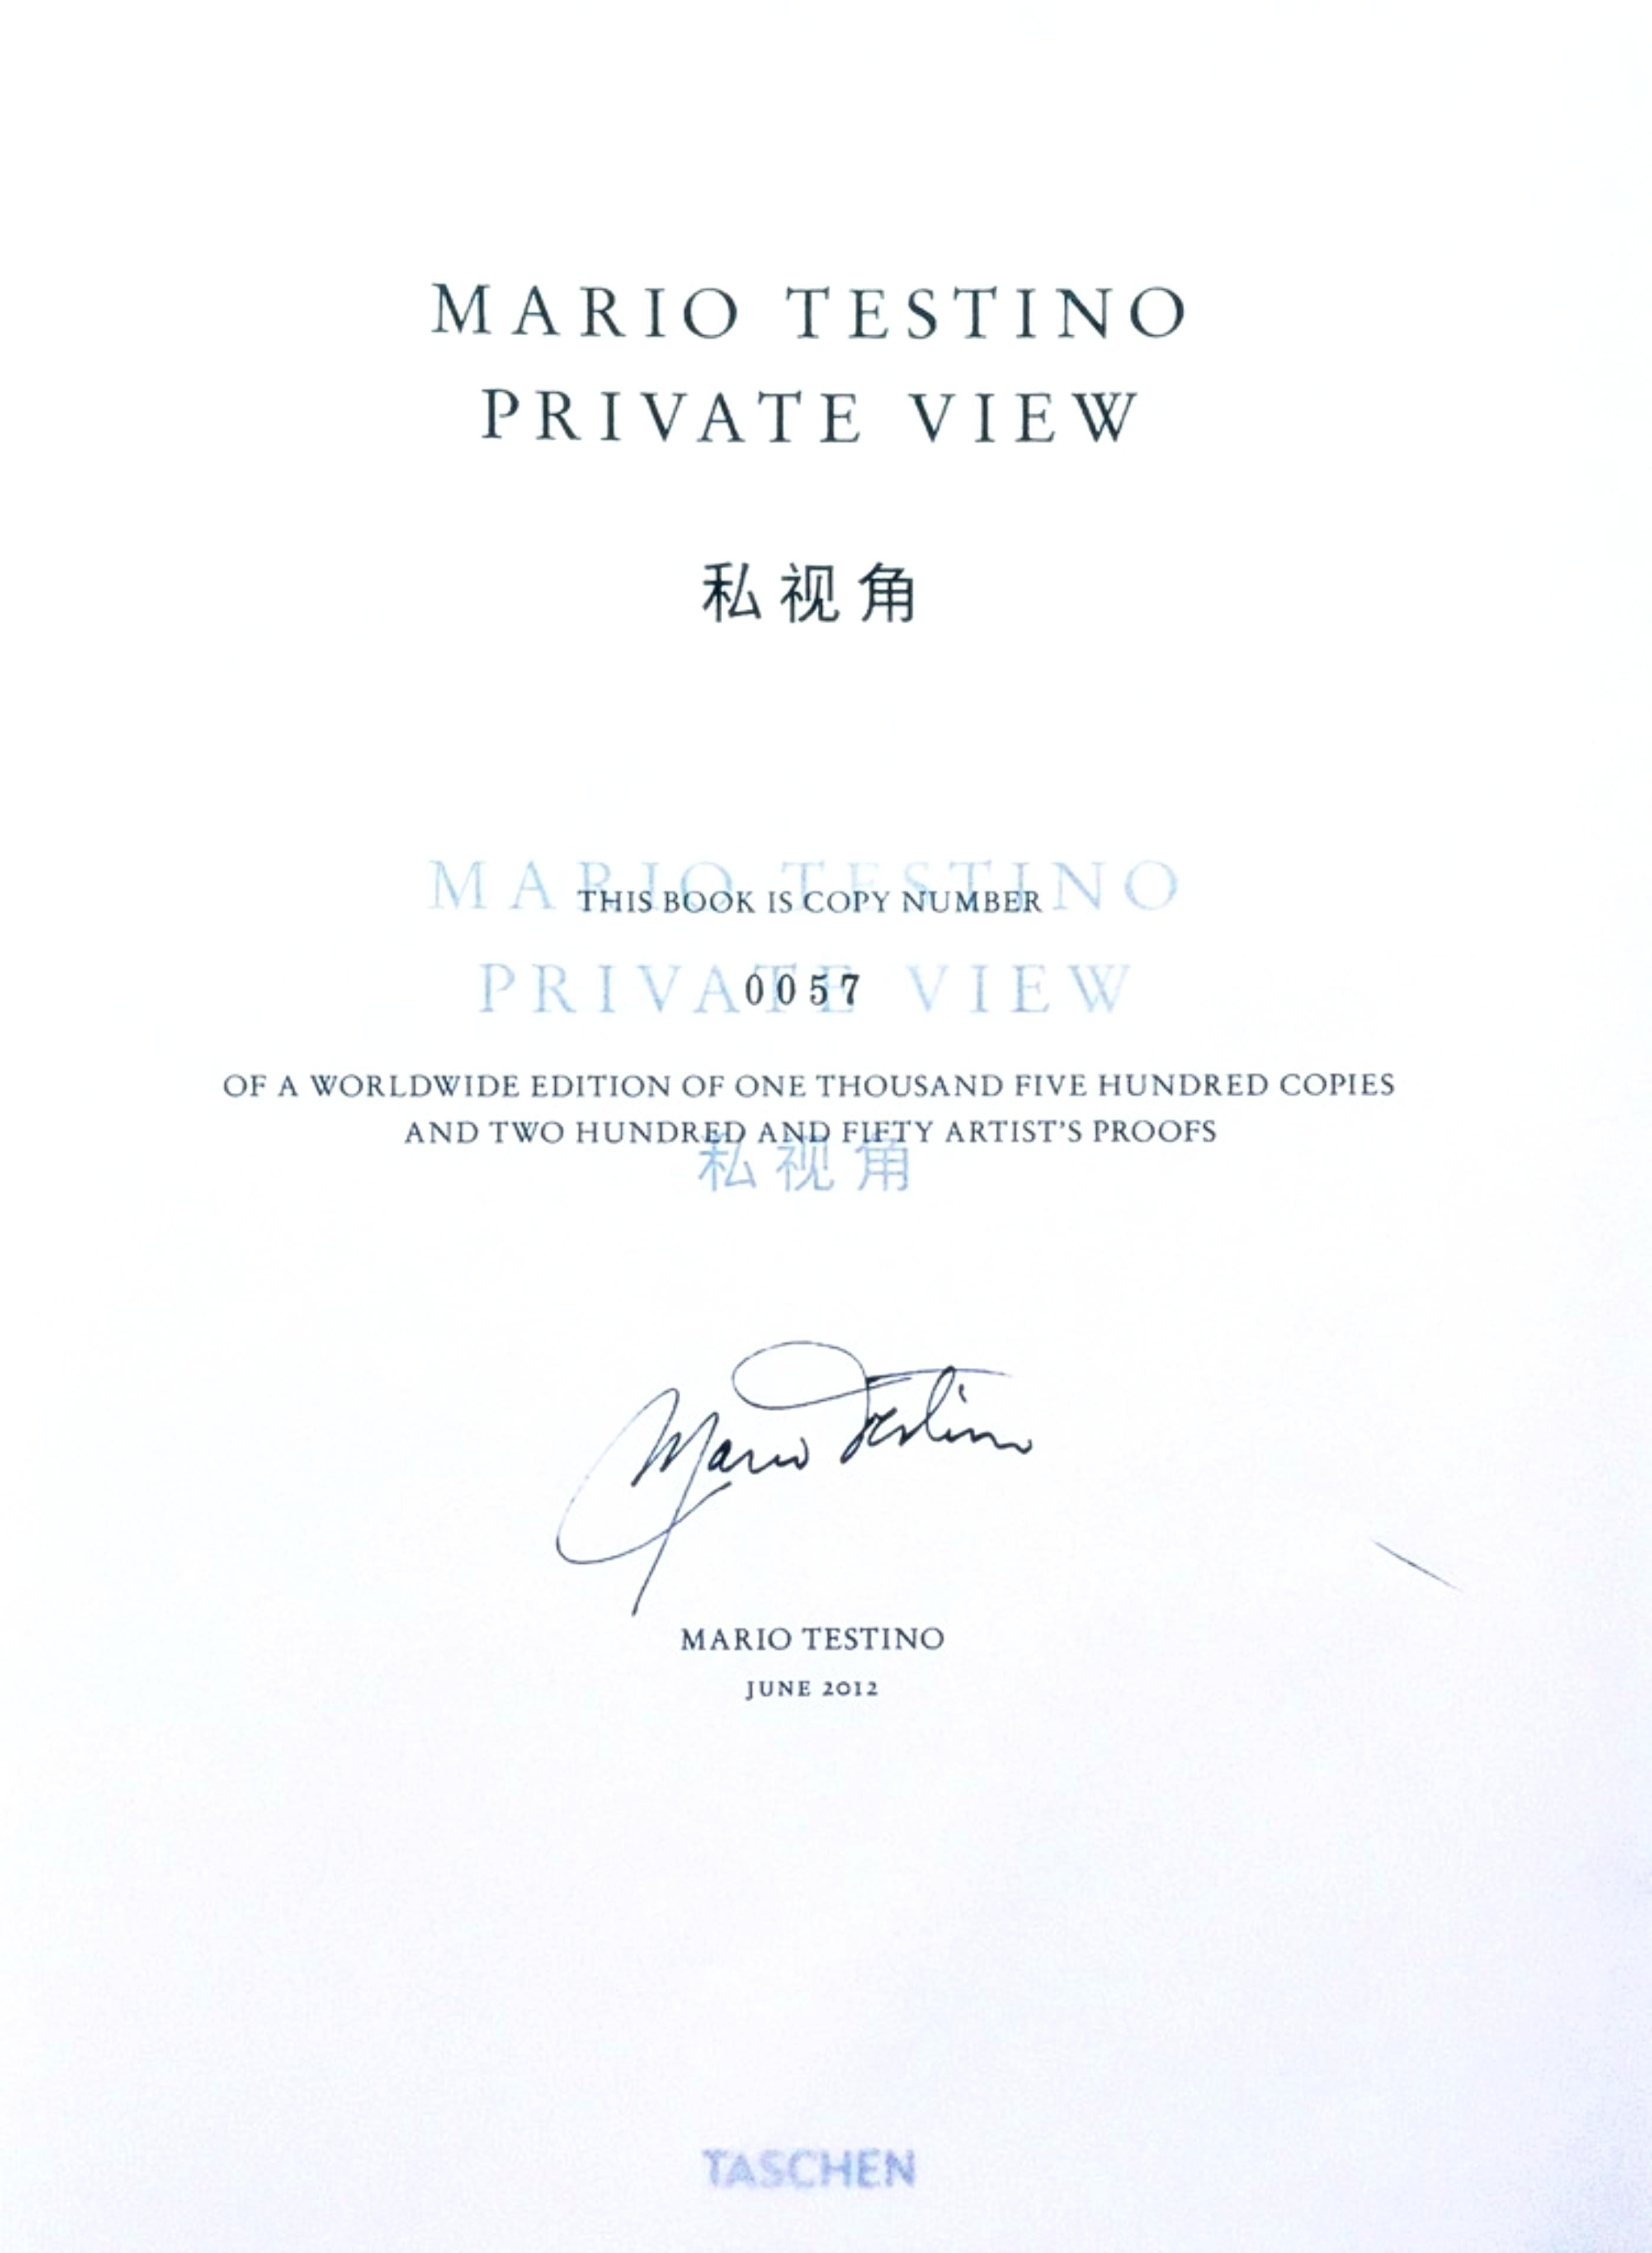 Lt Ed Hand Signed Book: Mario Testino Private View Bi-Lingual (Chinese-English) For Sale 7